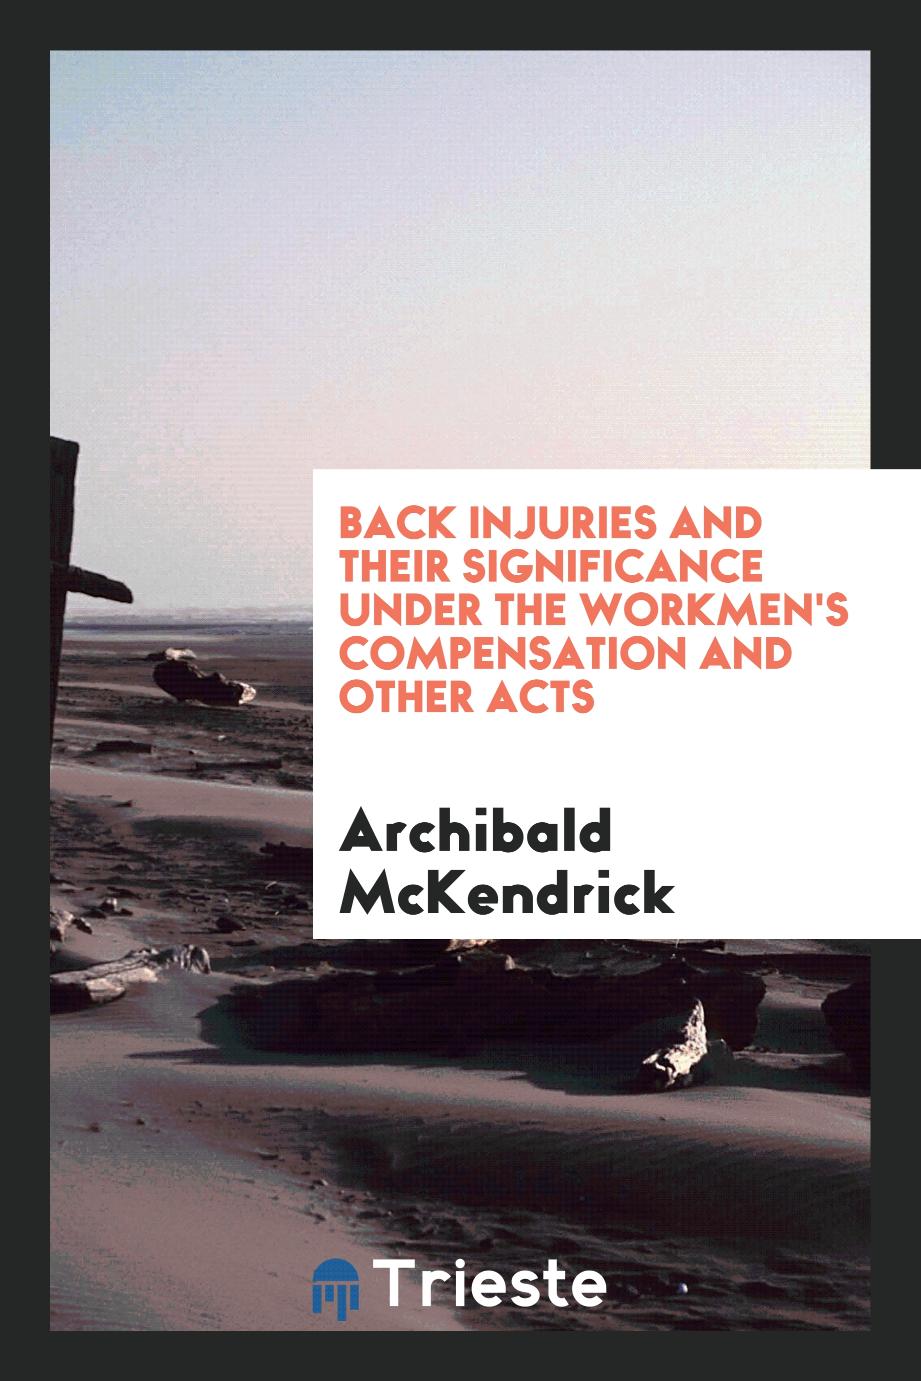 Back injuries and their significance under the Workmen's compensation and other acts